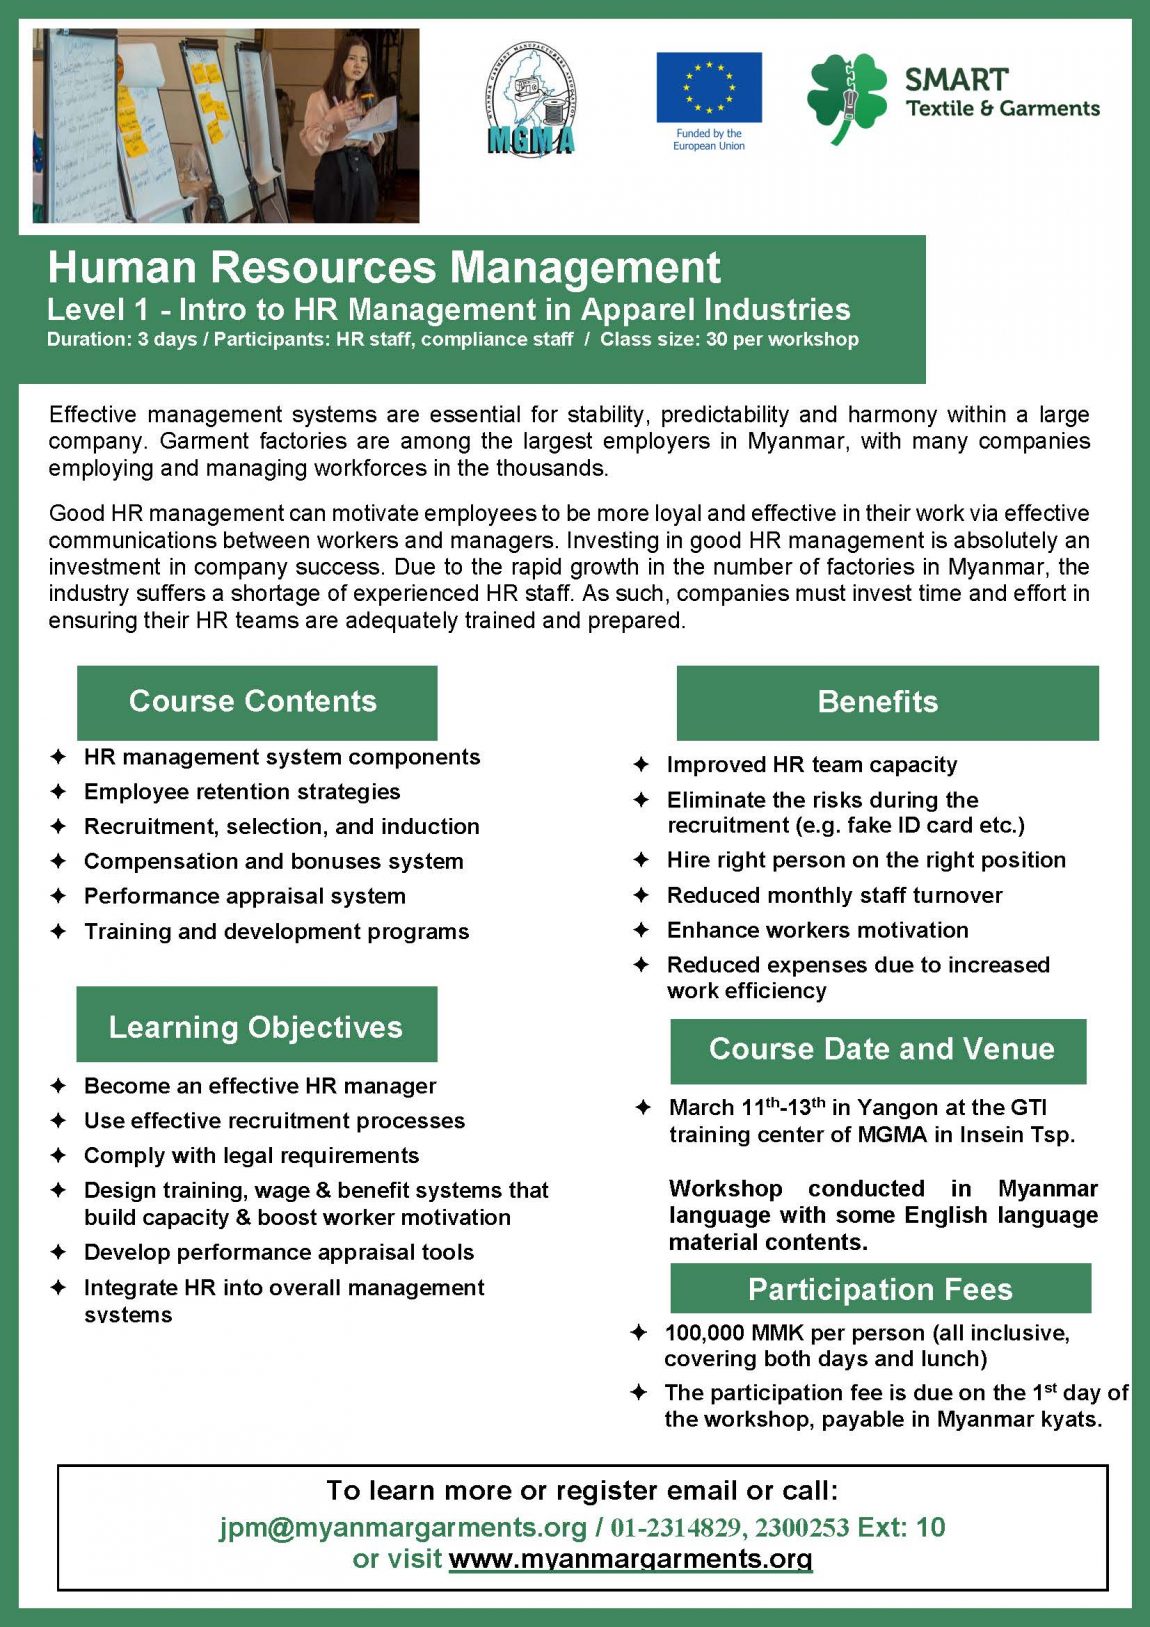 Human Resource Management Level -1 Intro to HR Management in Apparel Industries